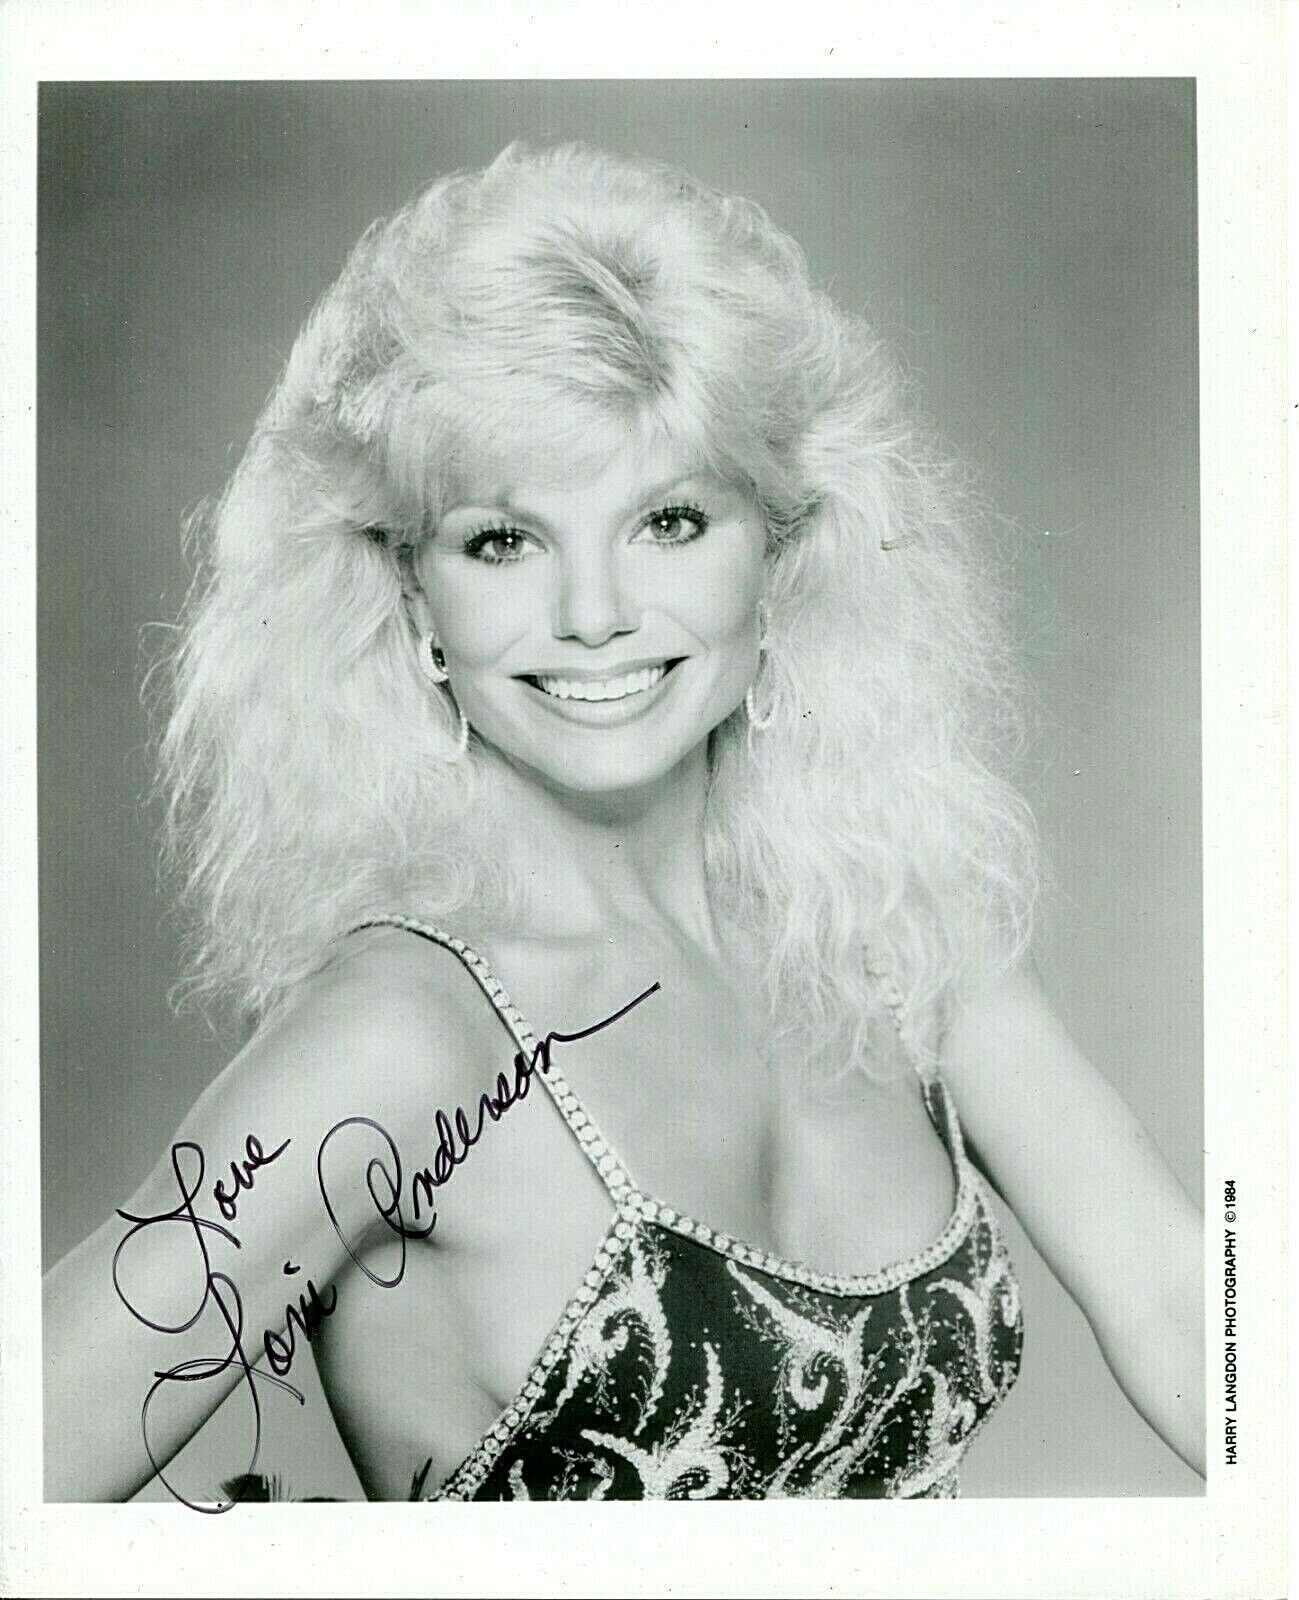 LONI ANDERSON Autographed 8X10 B&W Photo Poster painting PC 2564 WKRP in Cincinnati